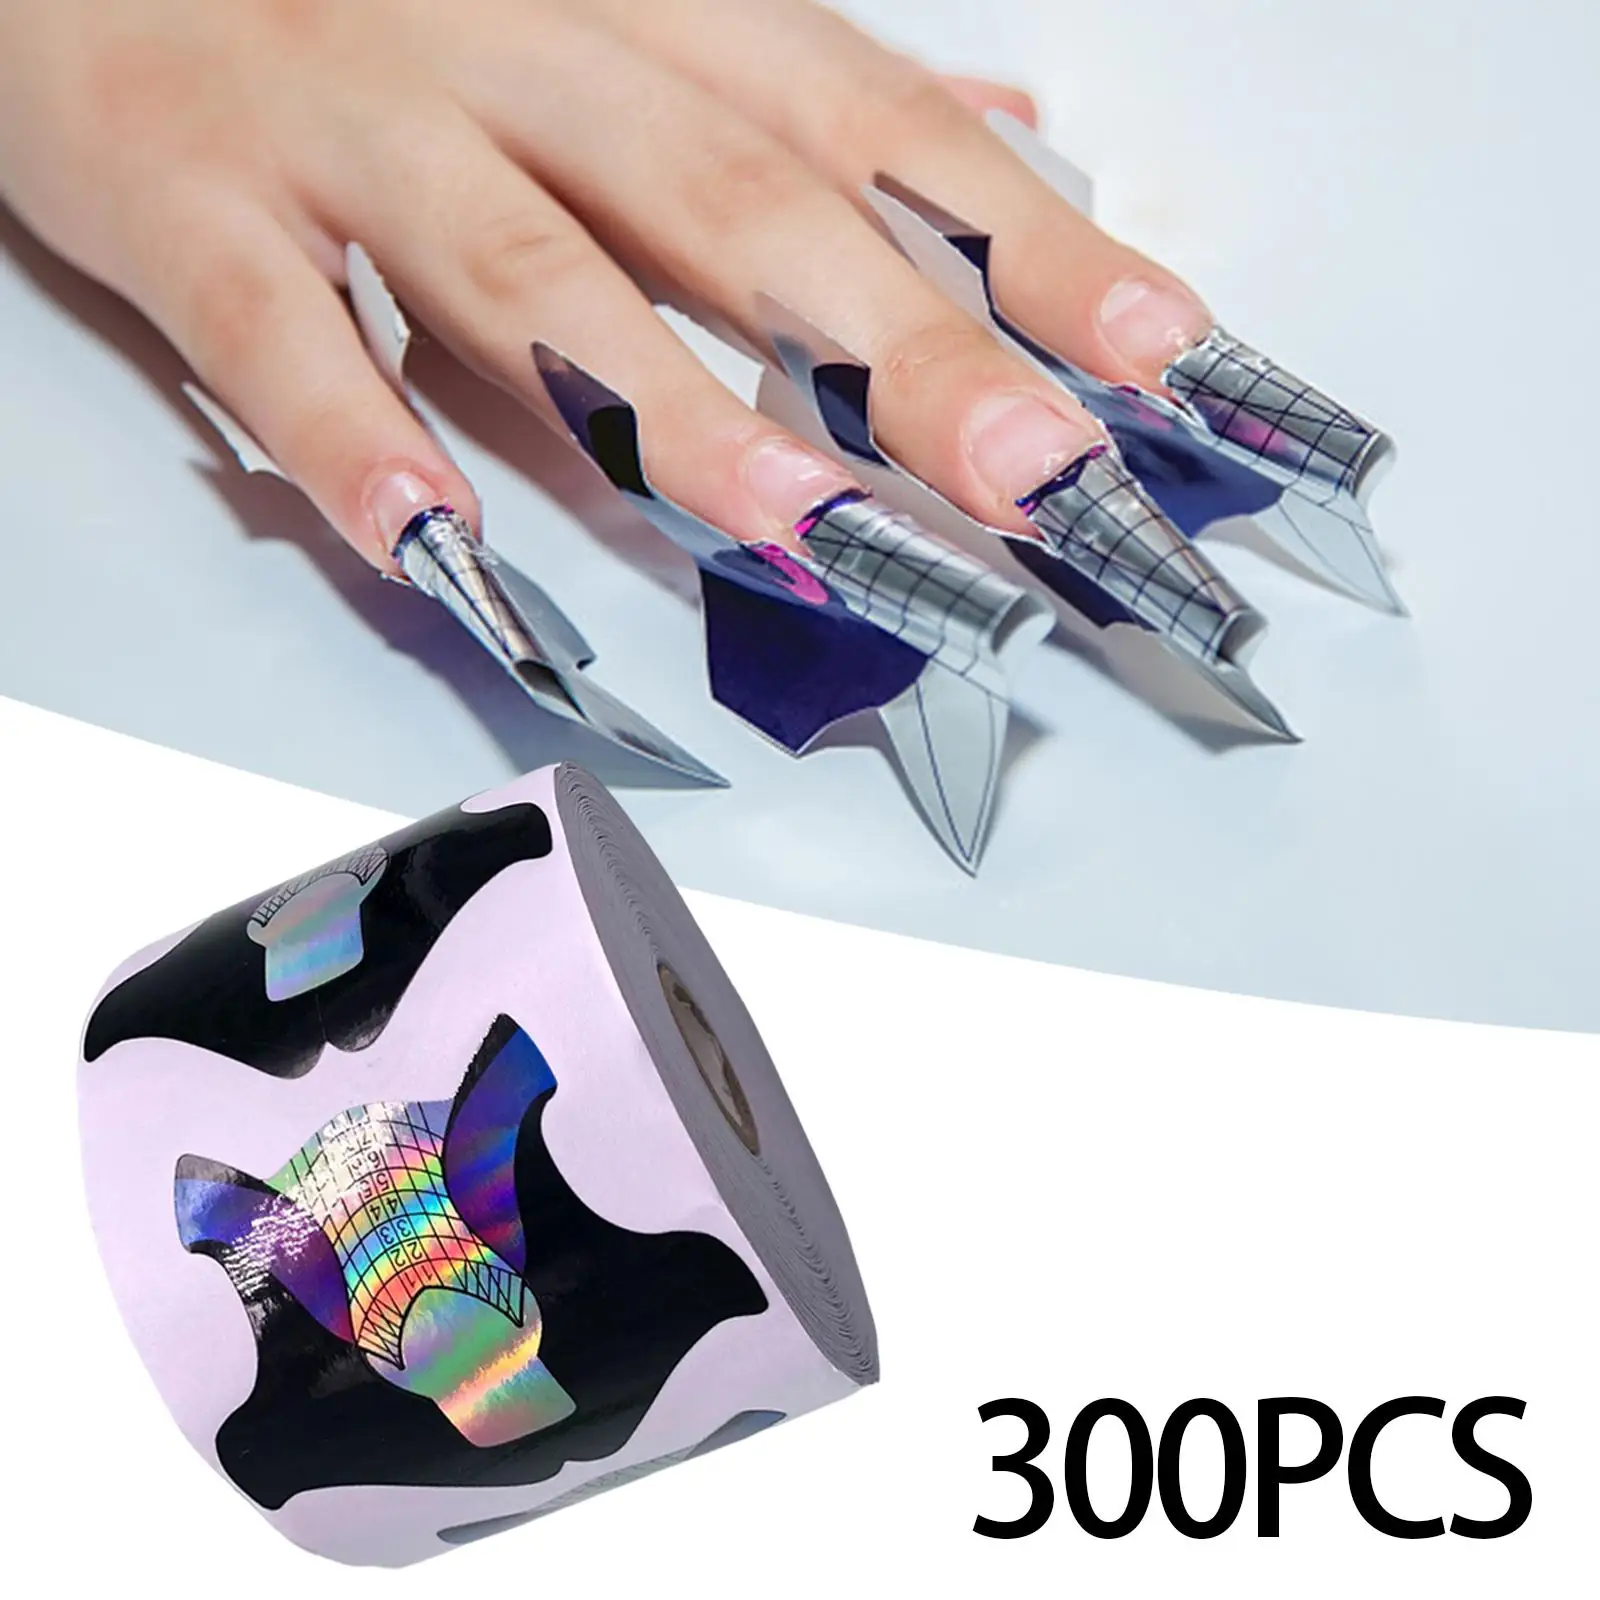 300Pcs Long Nail Forms for Acrylic Nails, Nail Extension Forms Guide Stickers Nail Paper Forms